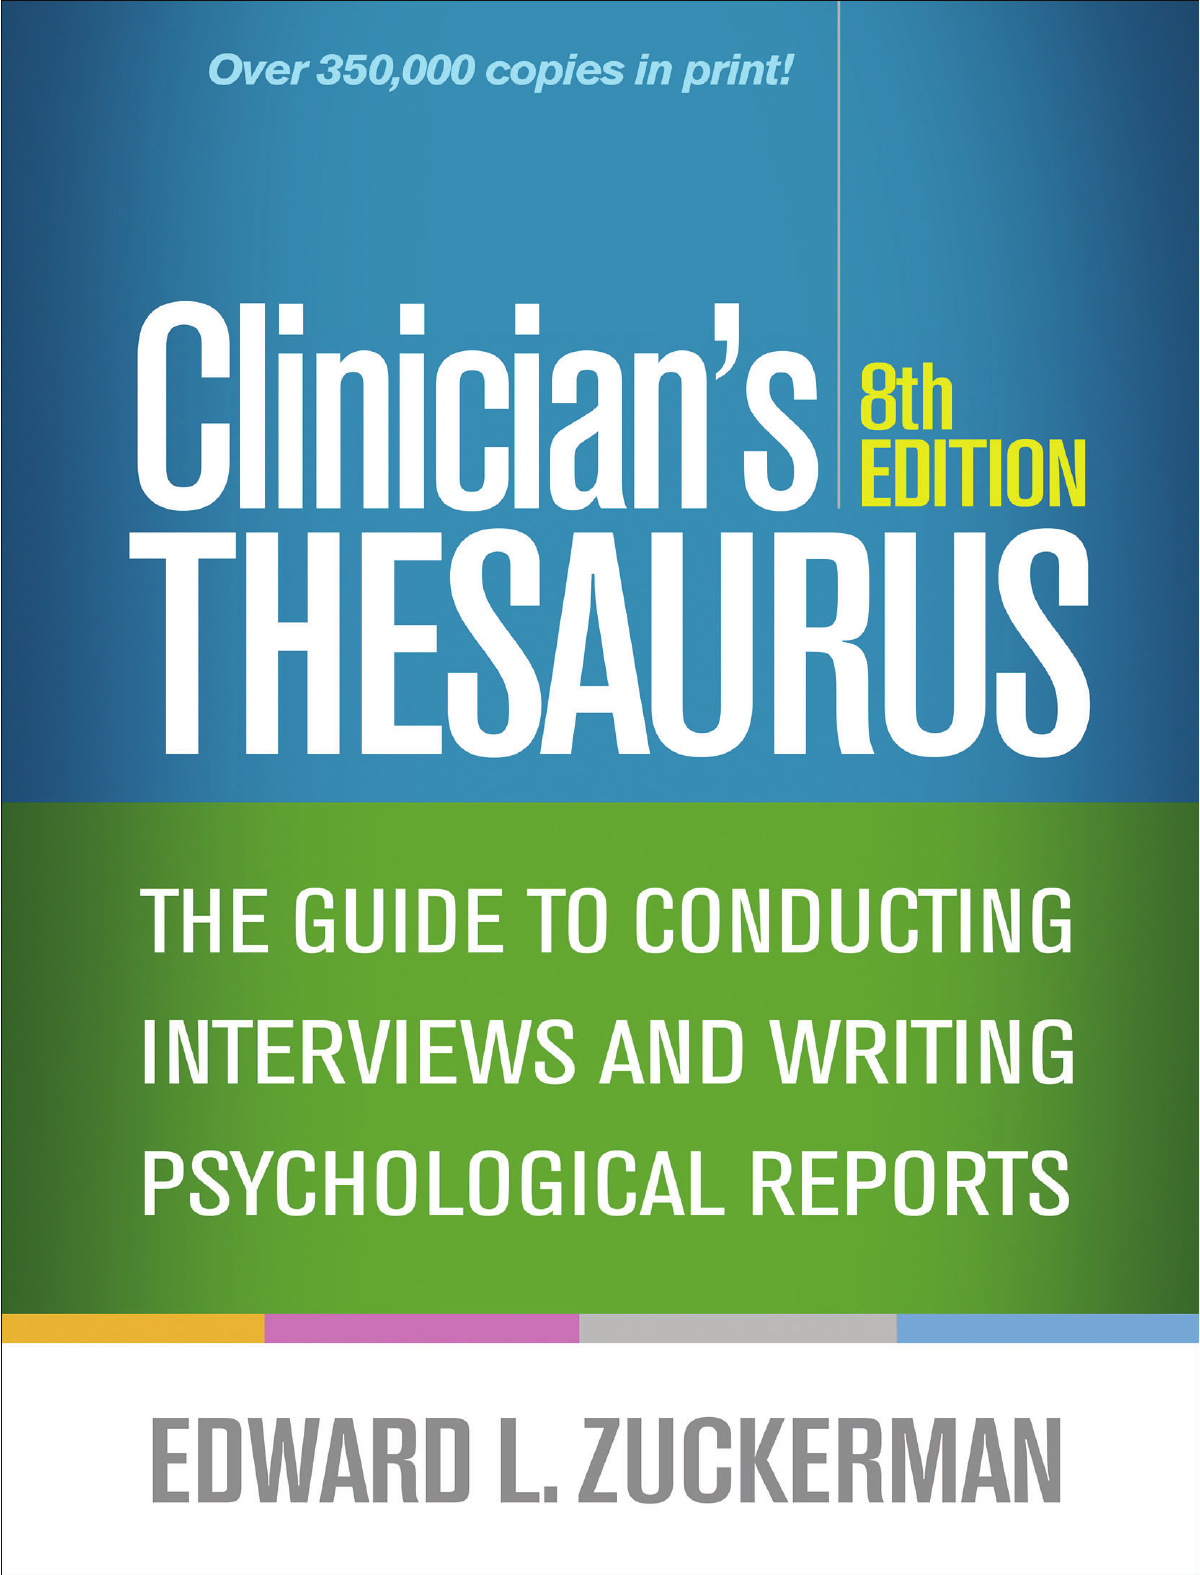 Clinicians Thesaurus 8th Edition The Guide to Conducting Interview photo